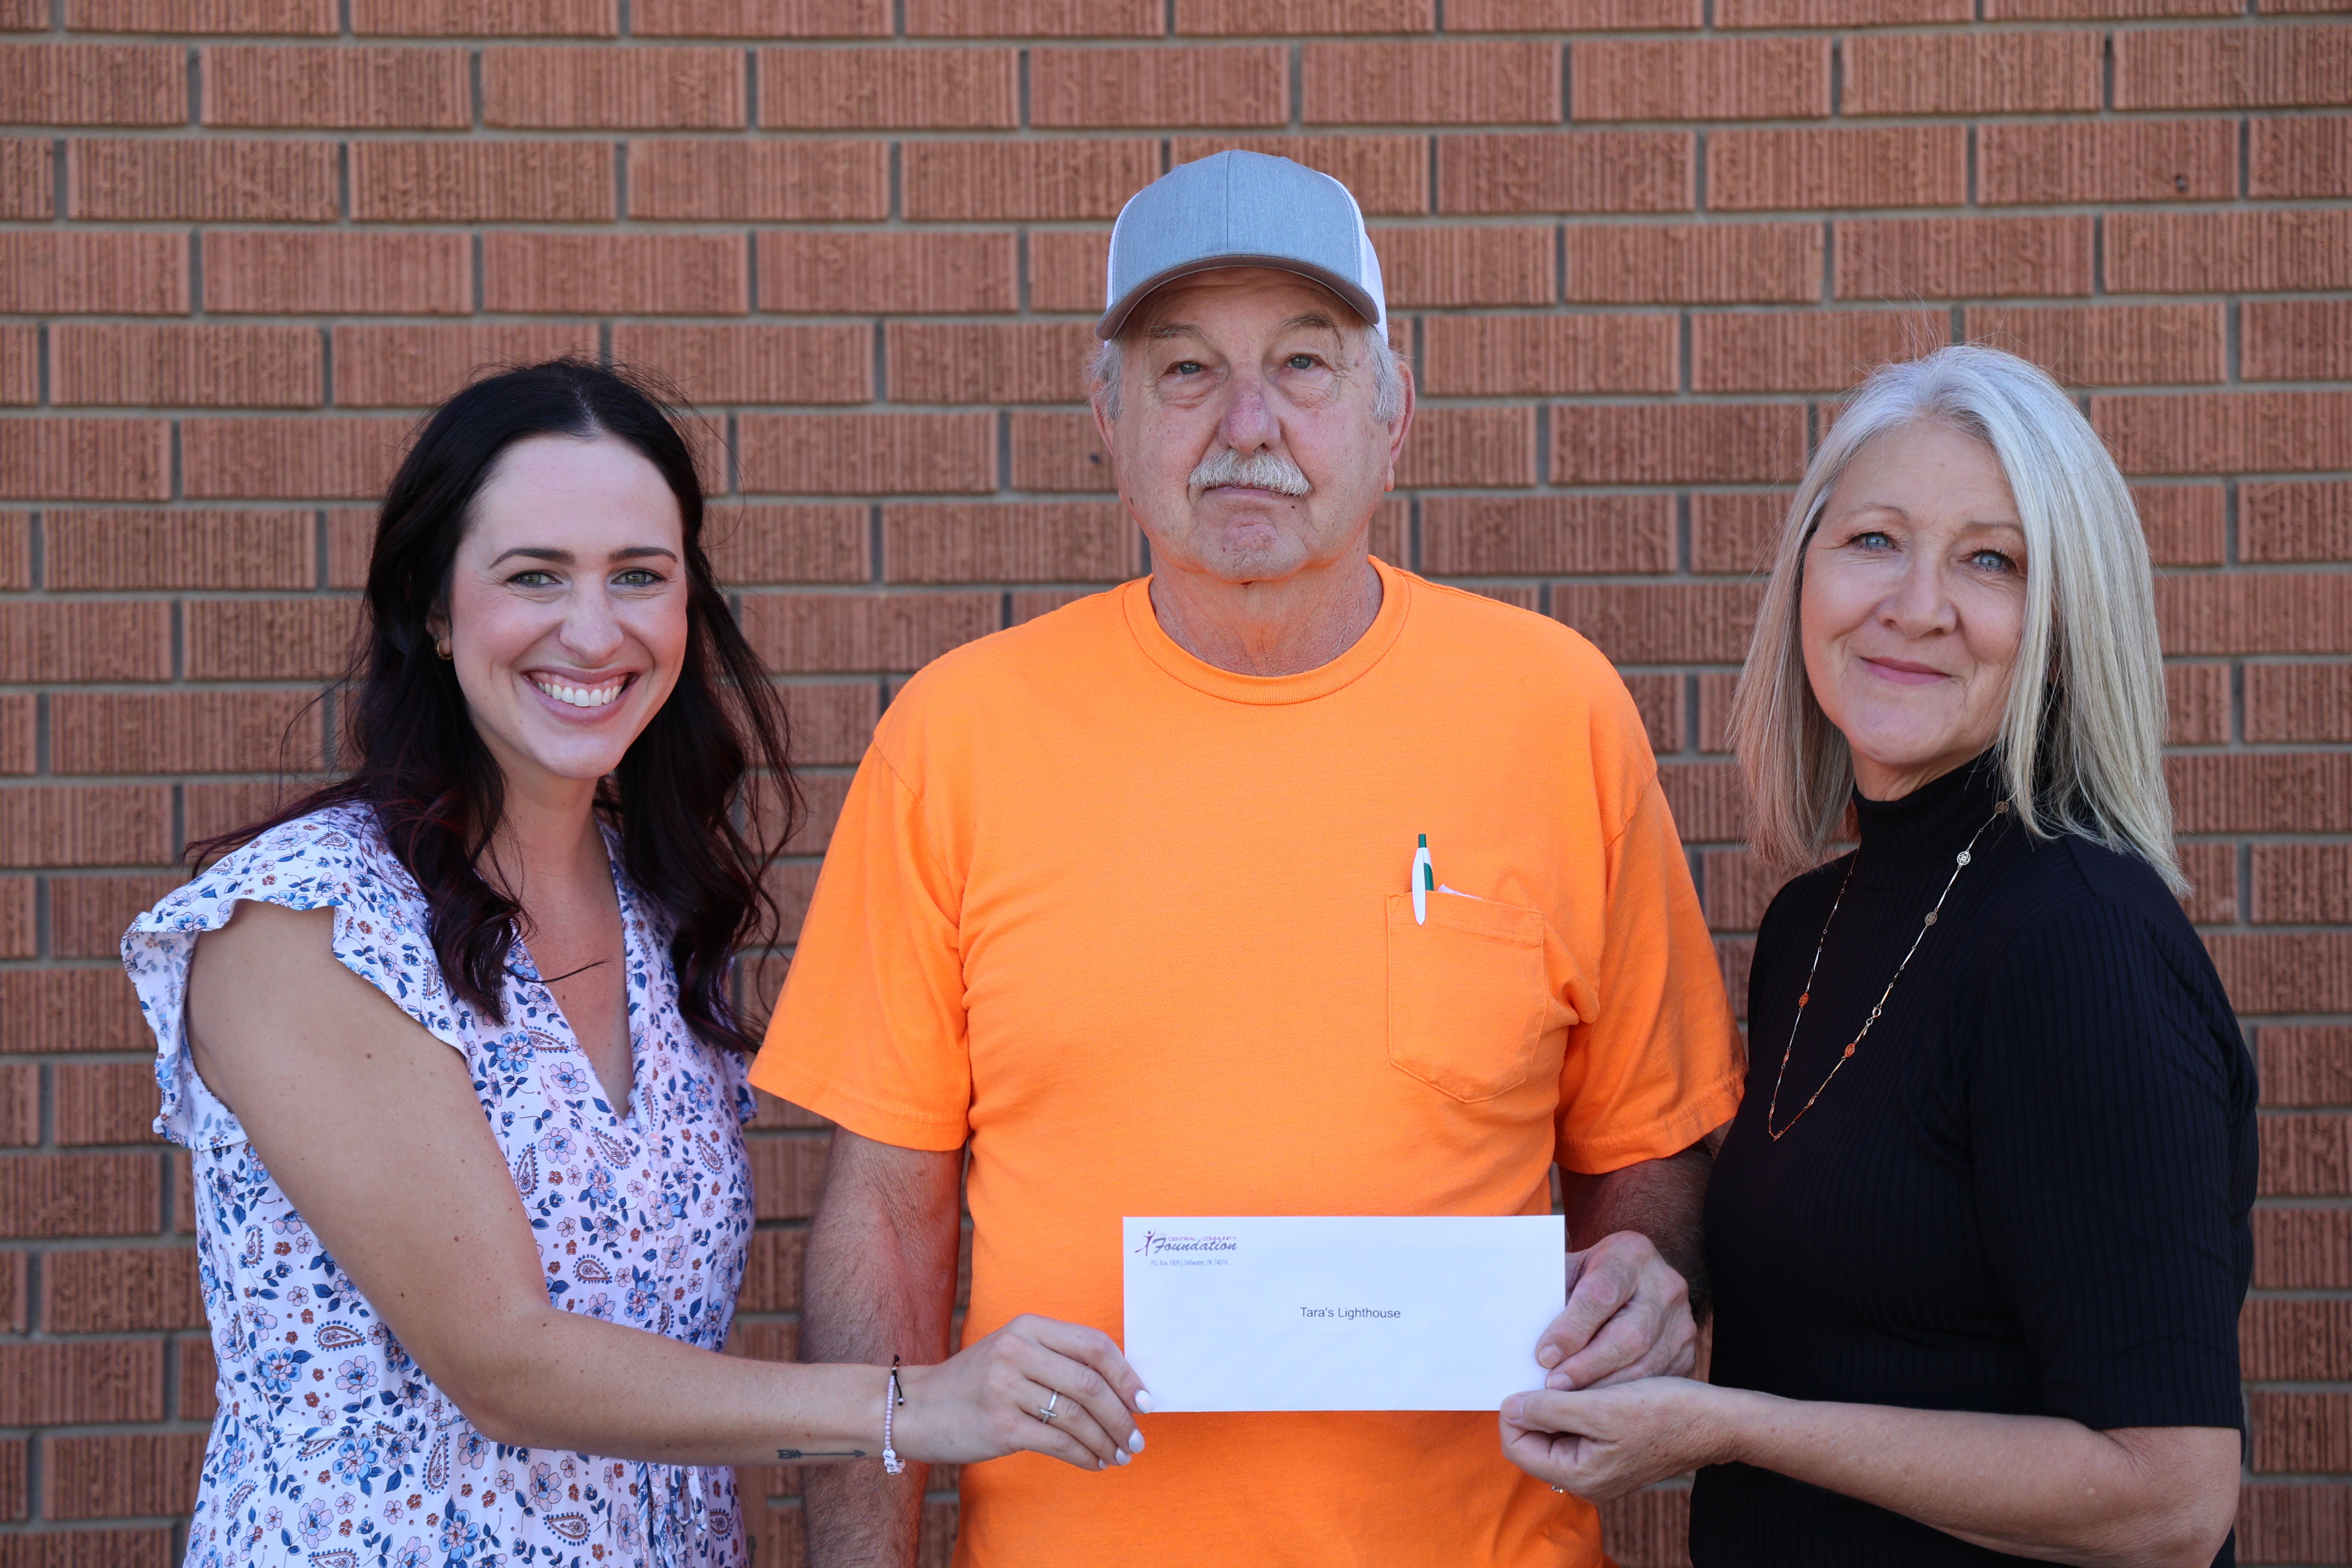 From left to right) Erin Talley, Central Community Foundation coordinator; Randy Brown, Tara’s Light House board member; and Gail Cookerly, Central Foundation board member.